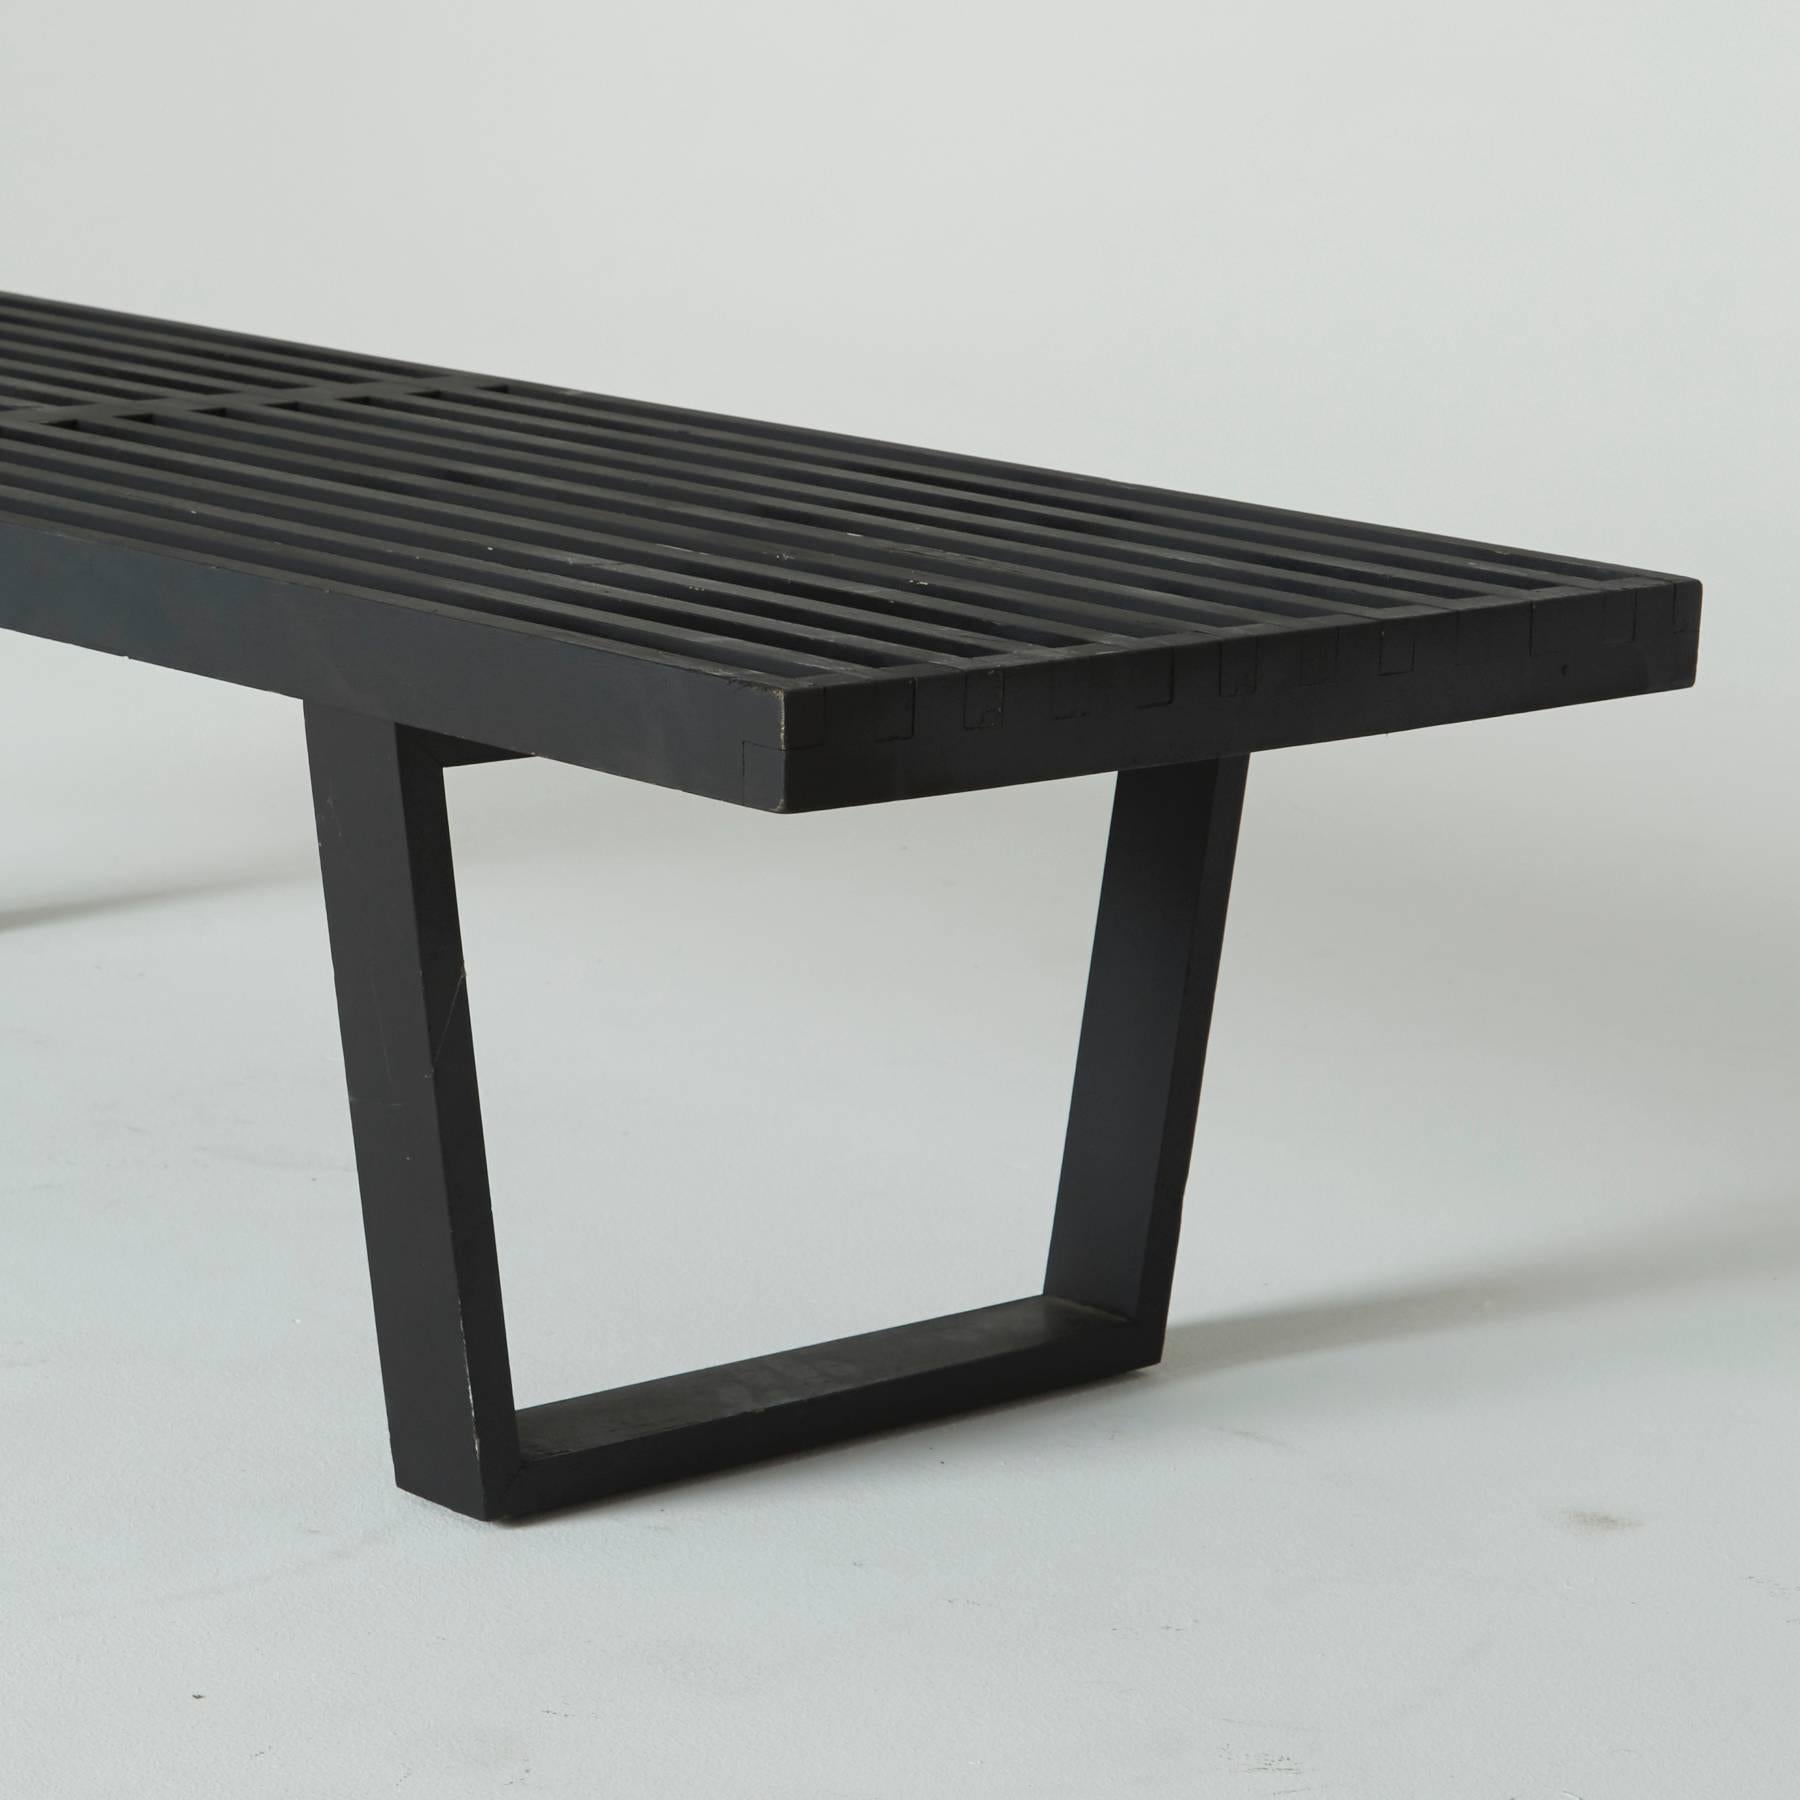 American Black Slatted Wood Bench by George Nelson for Herman Miller